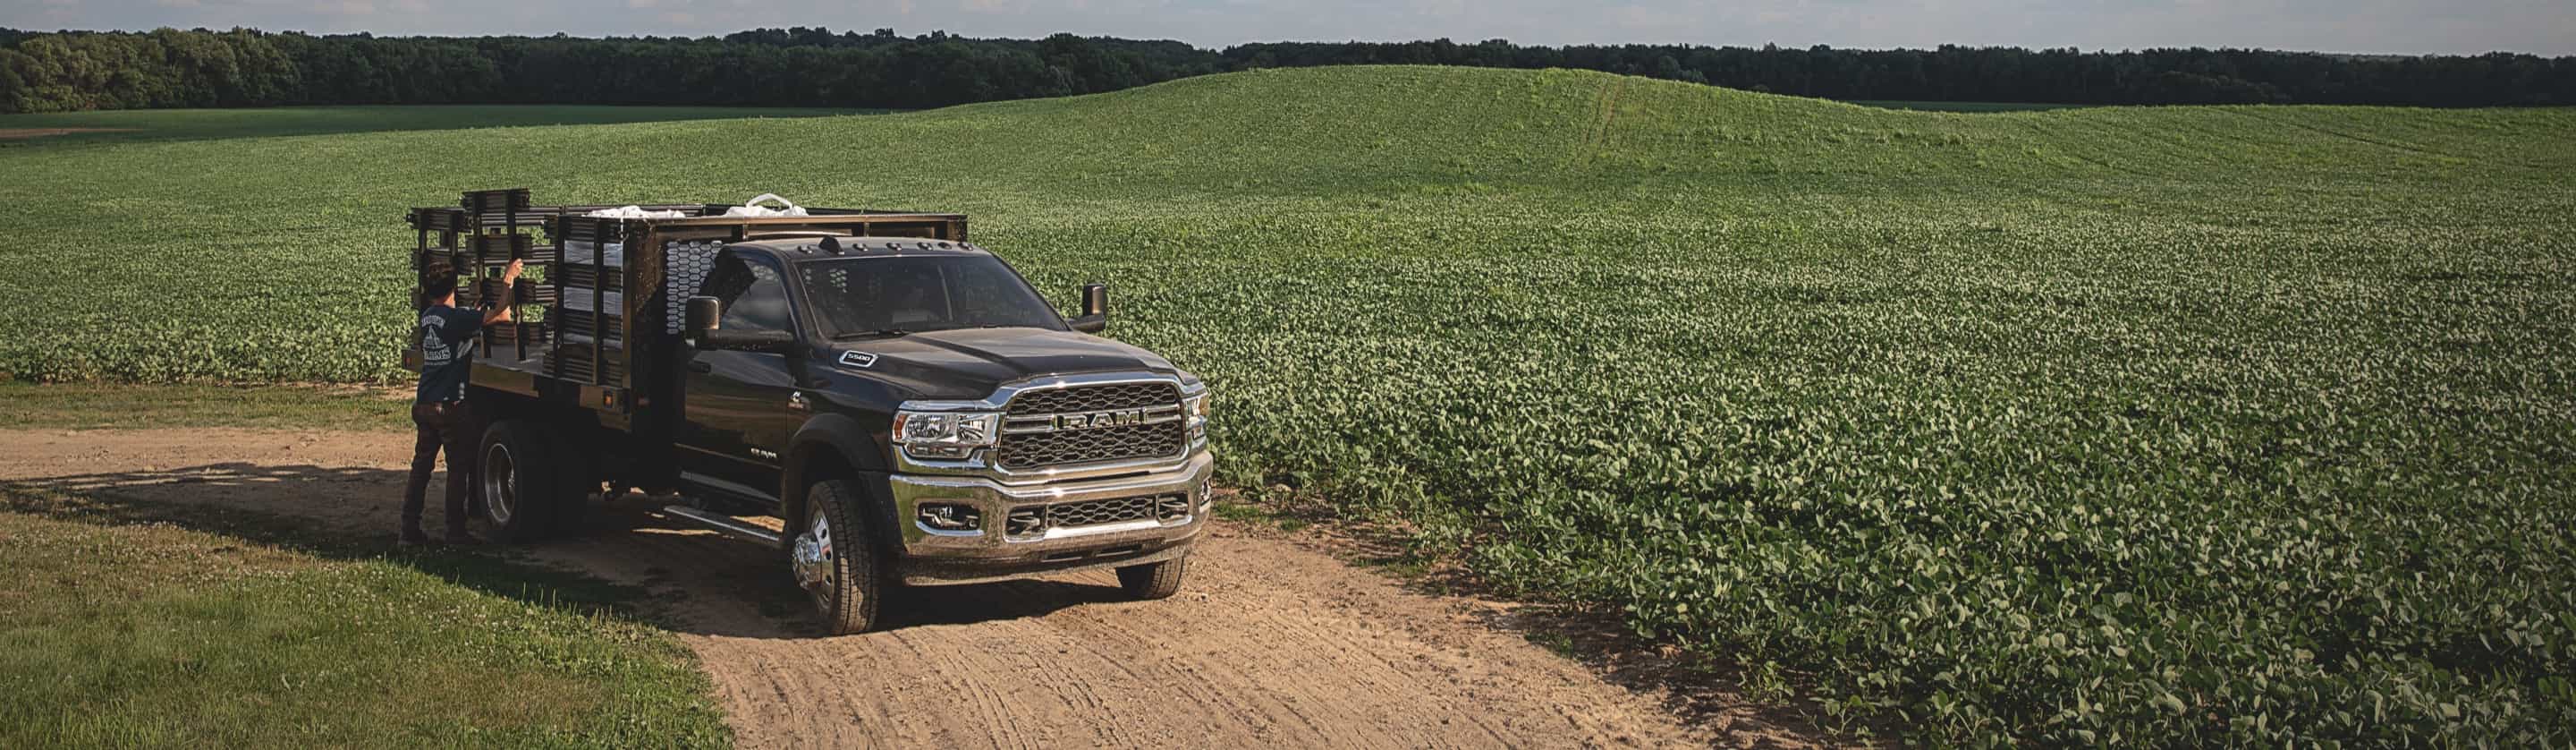 A 2019 Ram Chassis Cab with a stake upfit holding several large boxes, parked in a field.